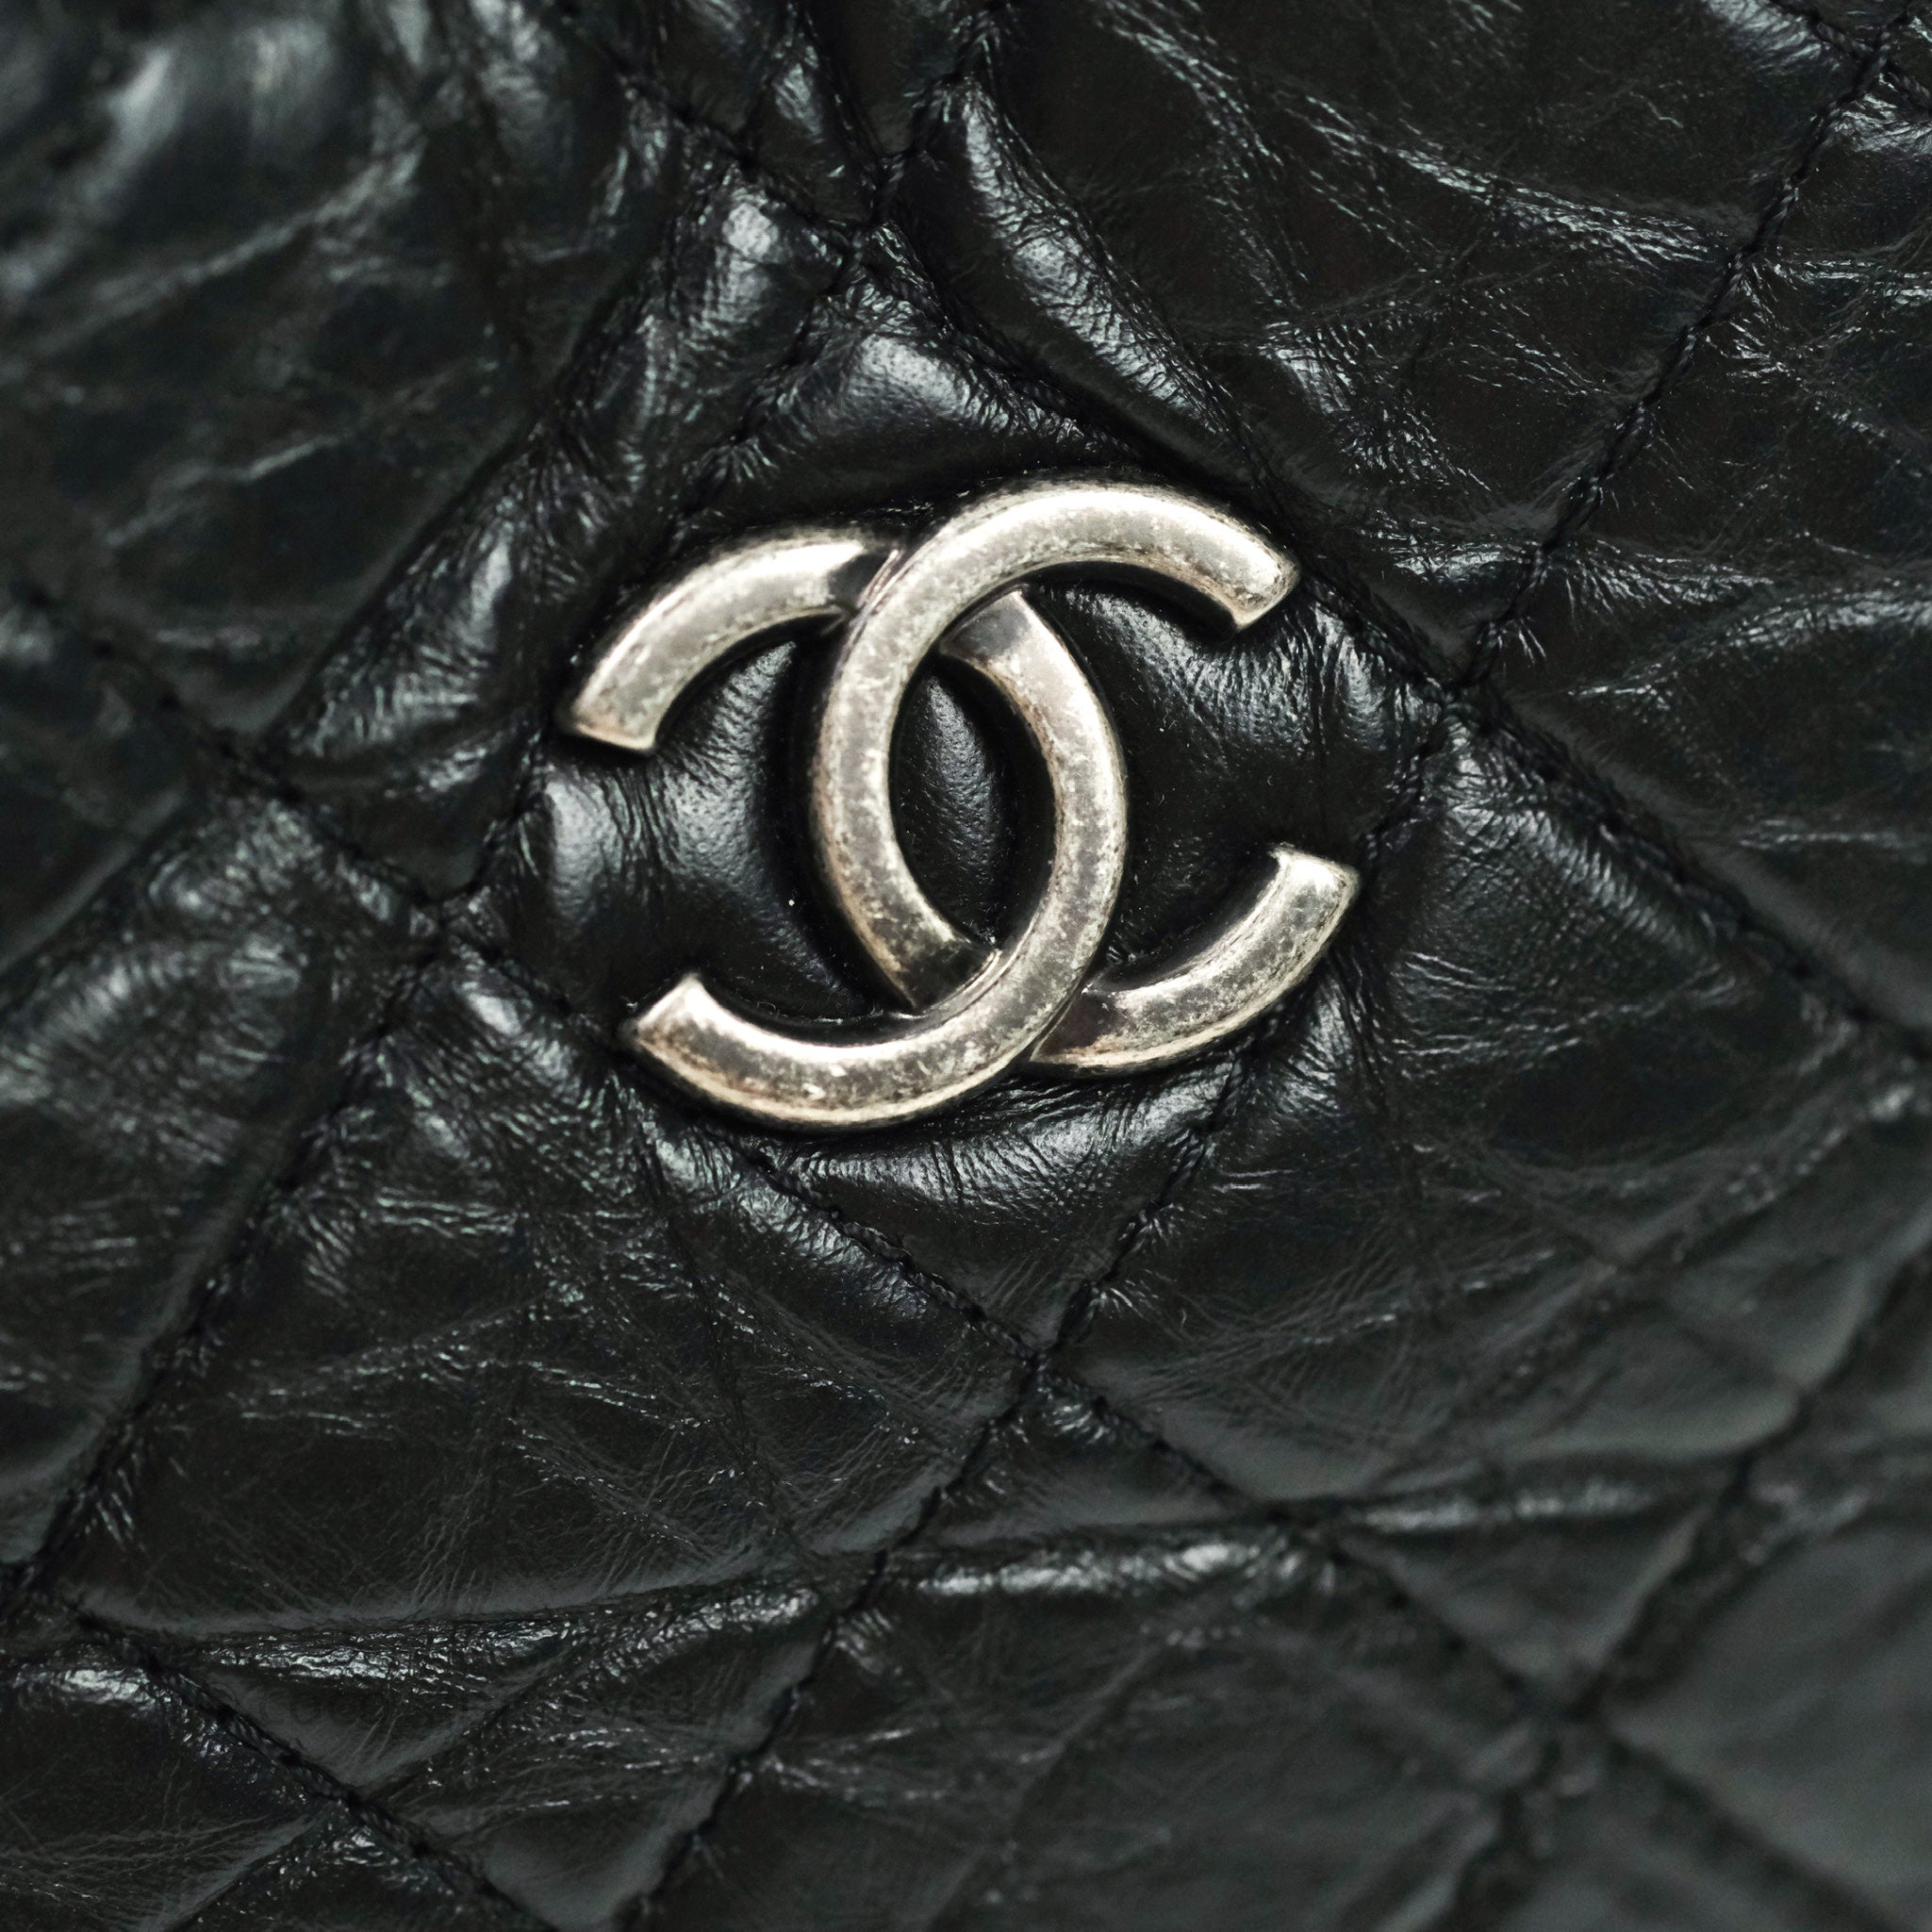 Chanel Small Gabrielle Backpack Black Aged Calfskin – Coco